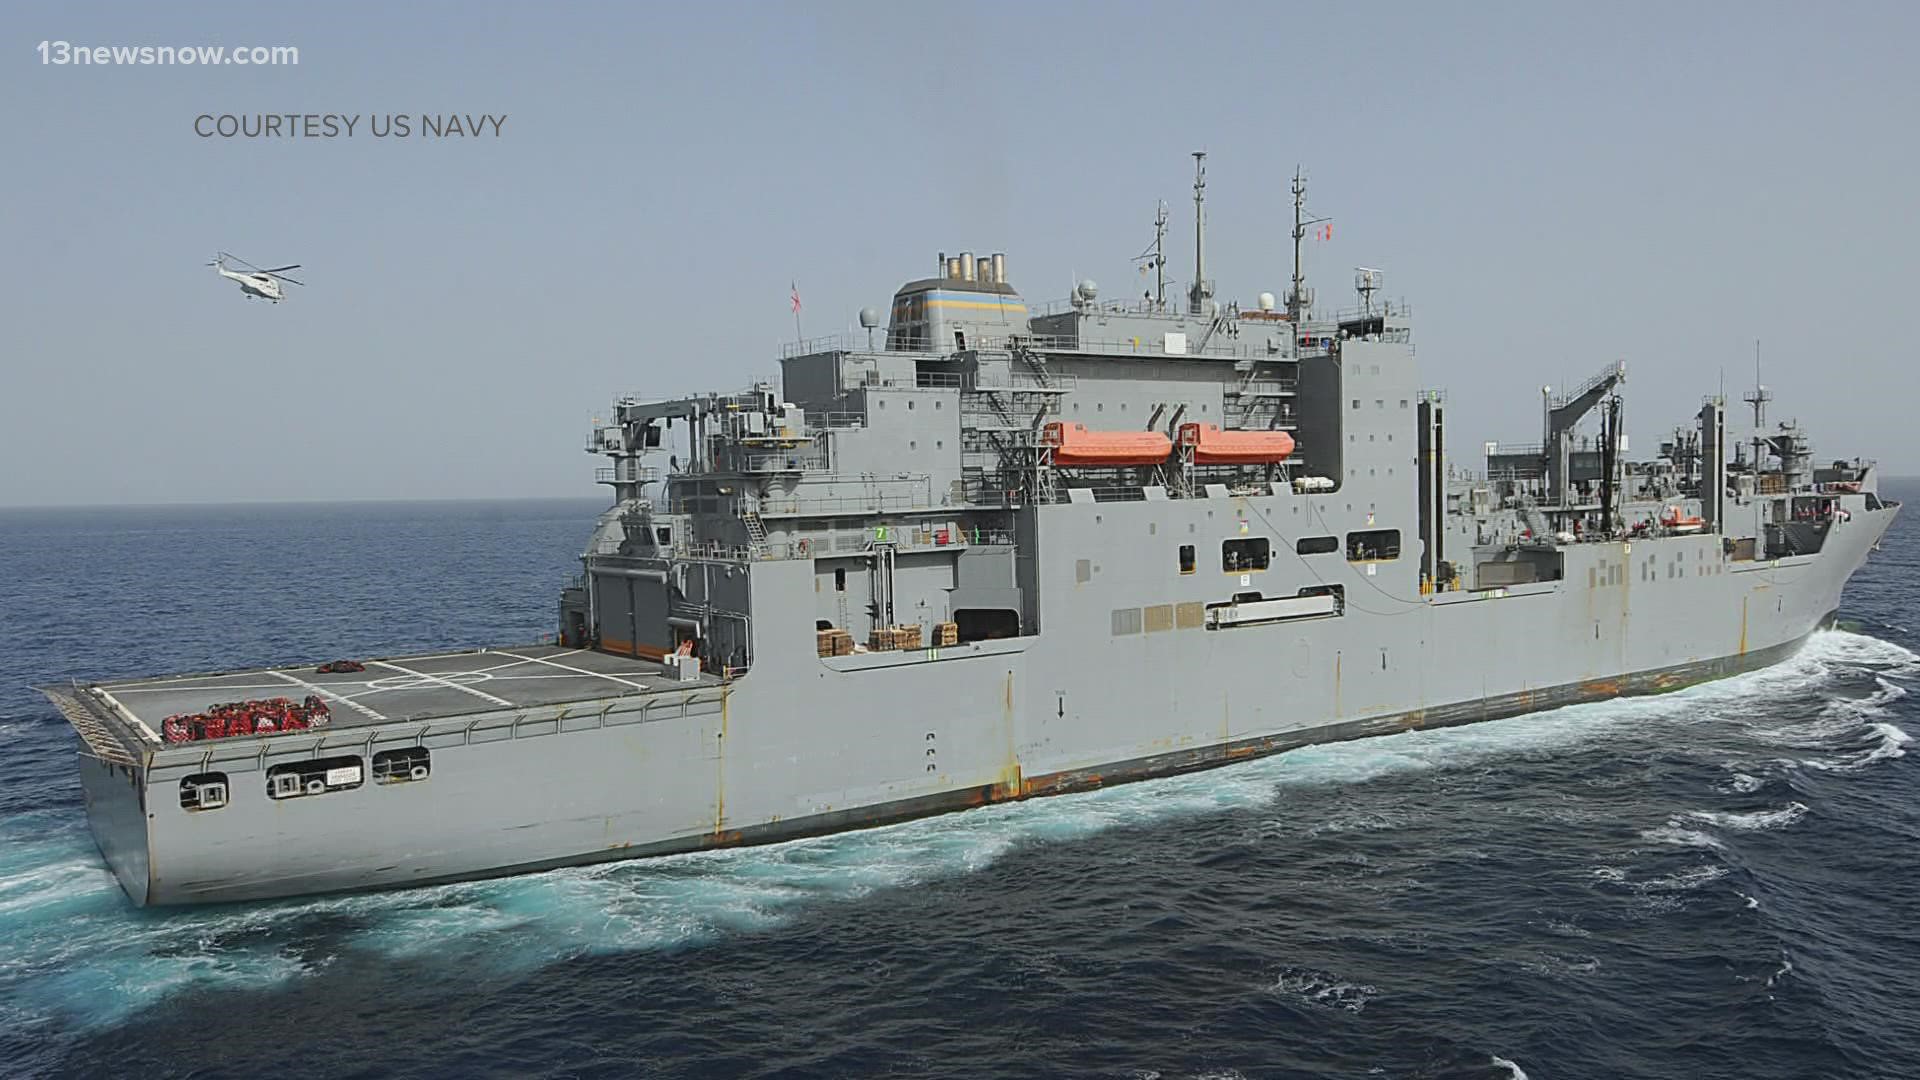 Crews onboard the USNS Peary will be home just in time for the New Year.